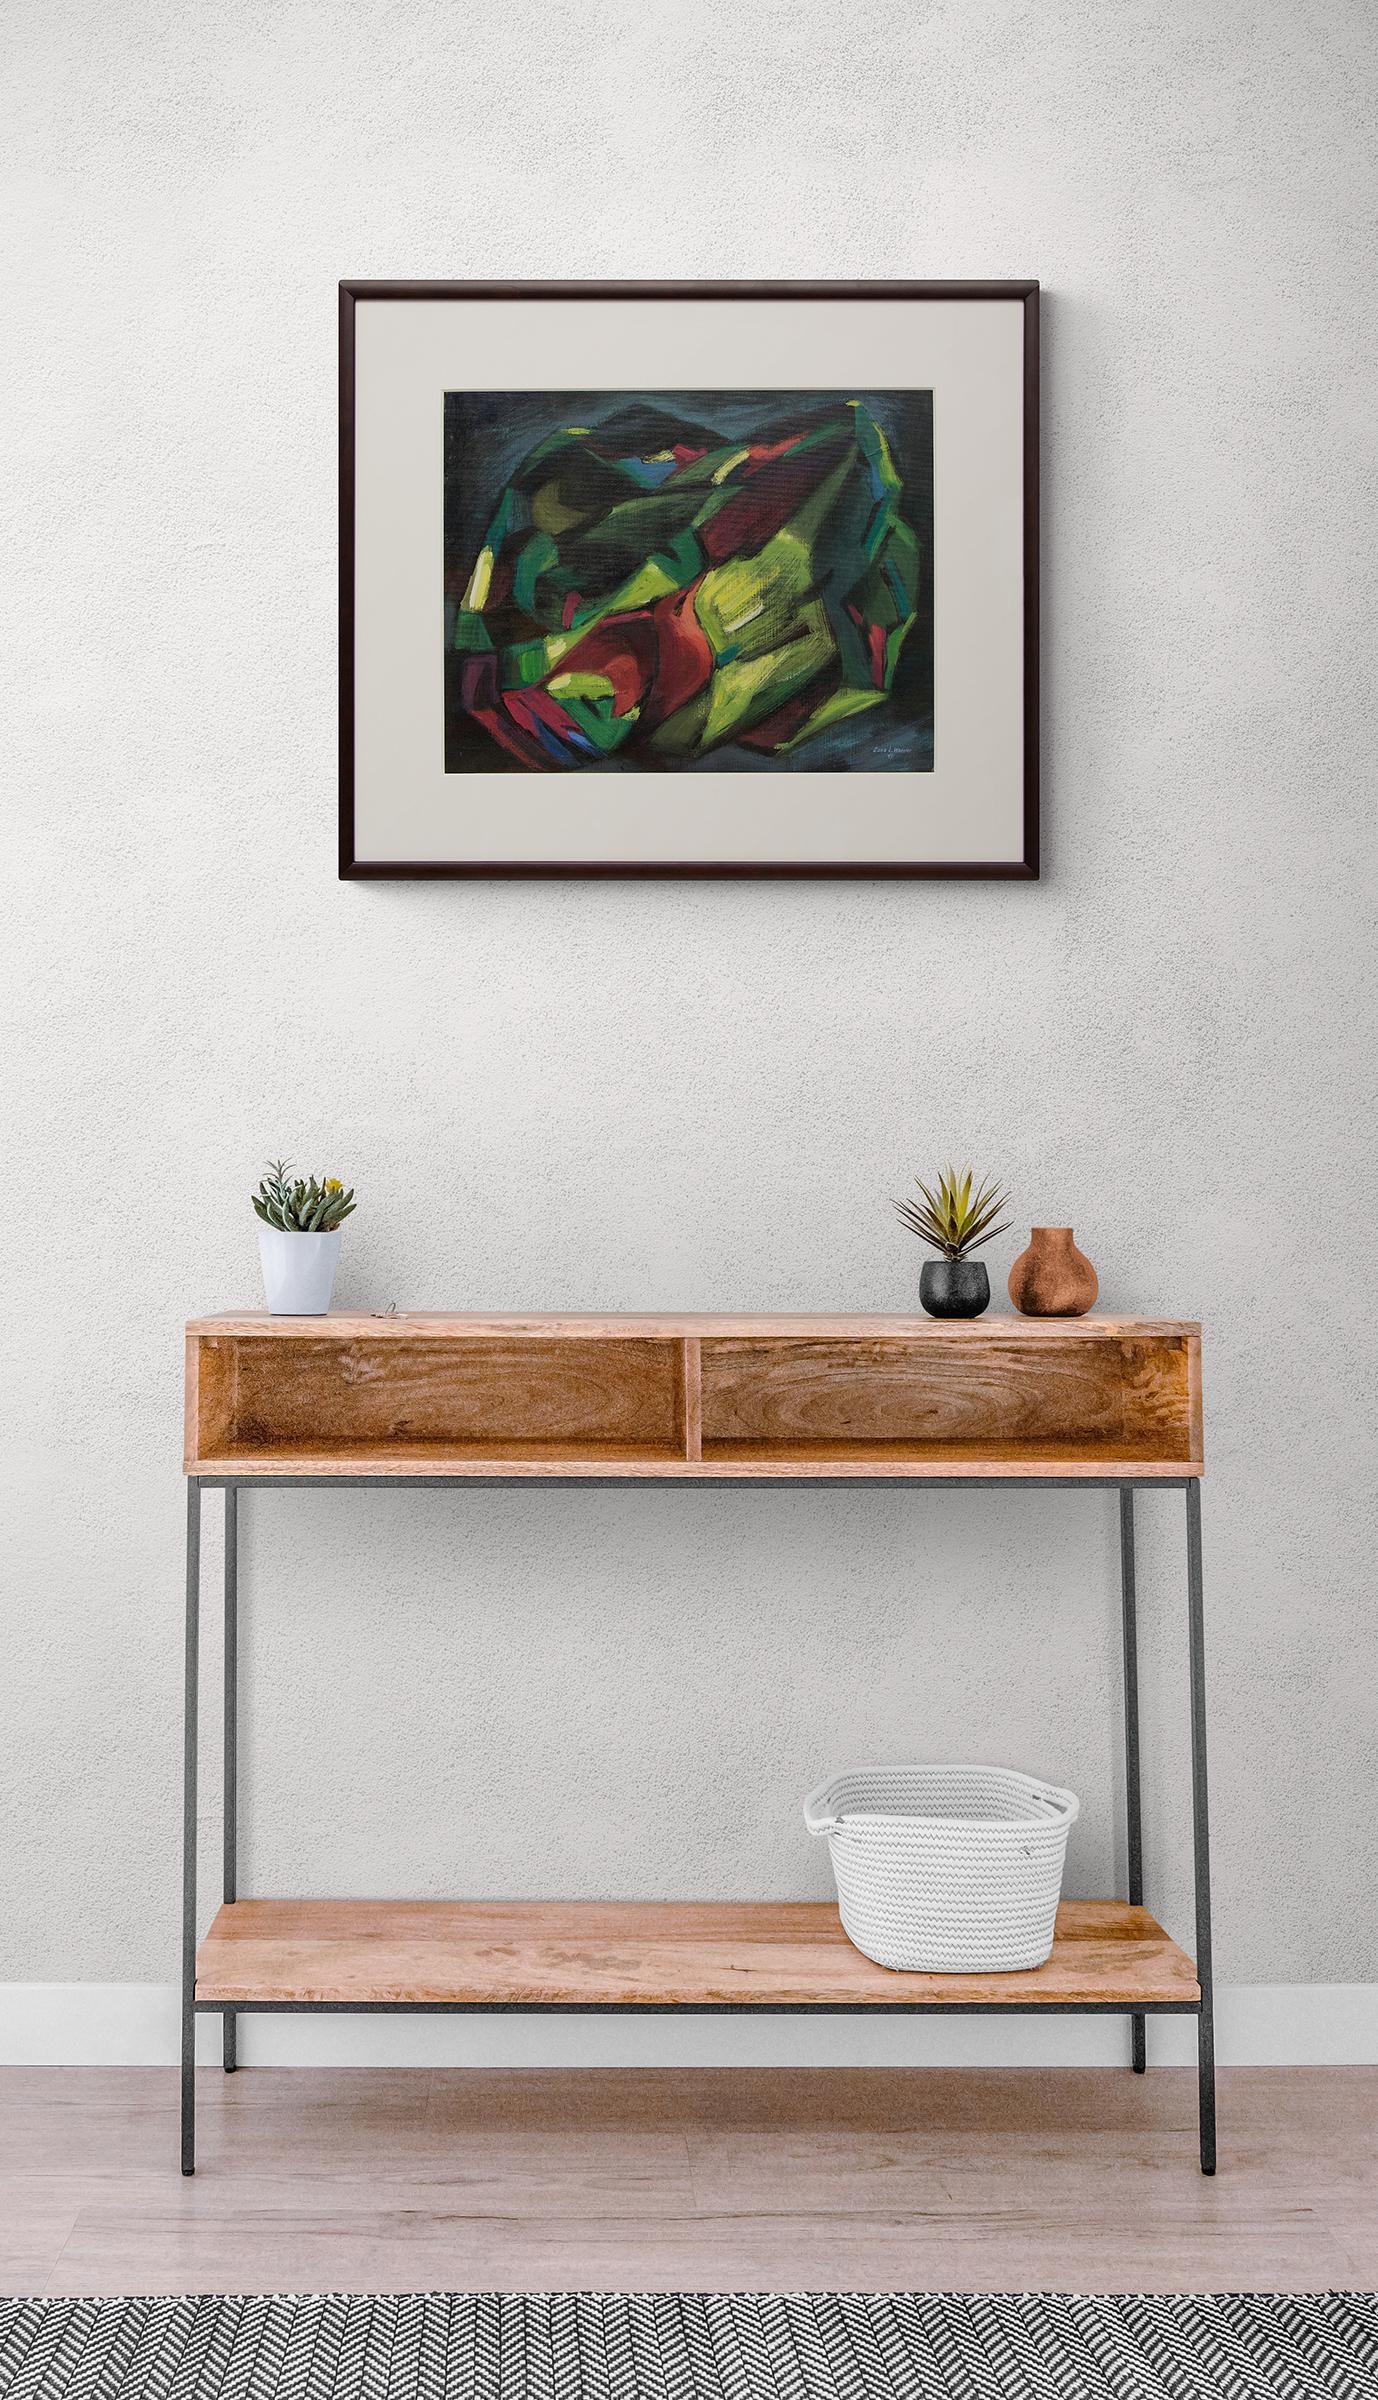 Original 1949 mid-century modern semi-abstract painting of Colorado Mountains by Kansas woman artist, Zona Wheeler (1913-1998) with shades of green, red blue, teal and yellow.  Signed and dated 1949 lower right. Presented in a custom frame with